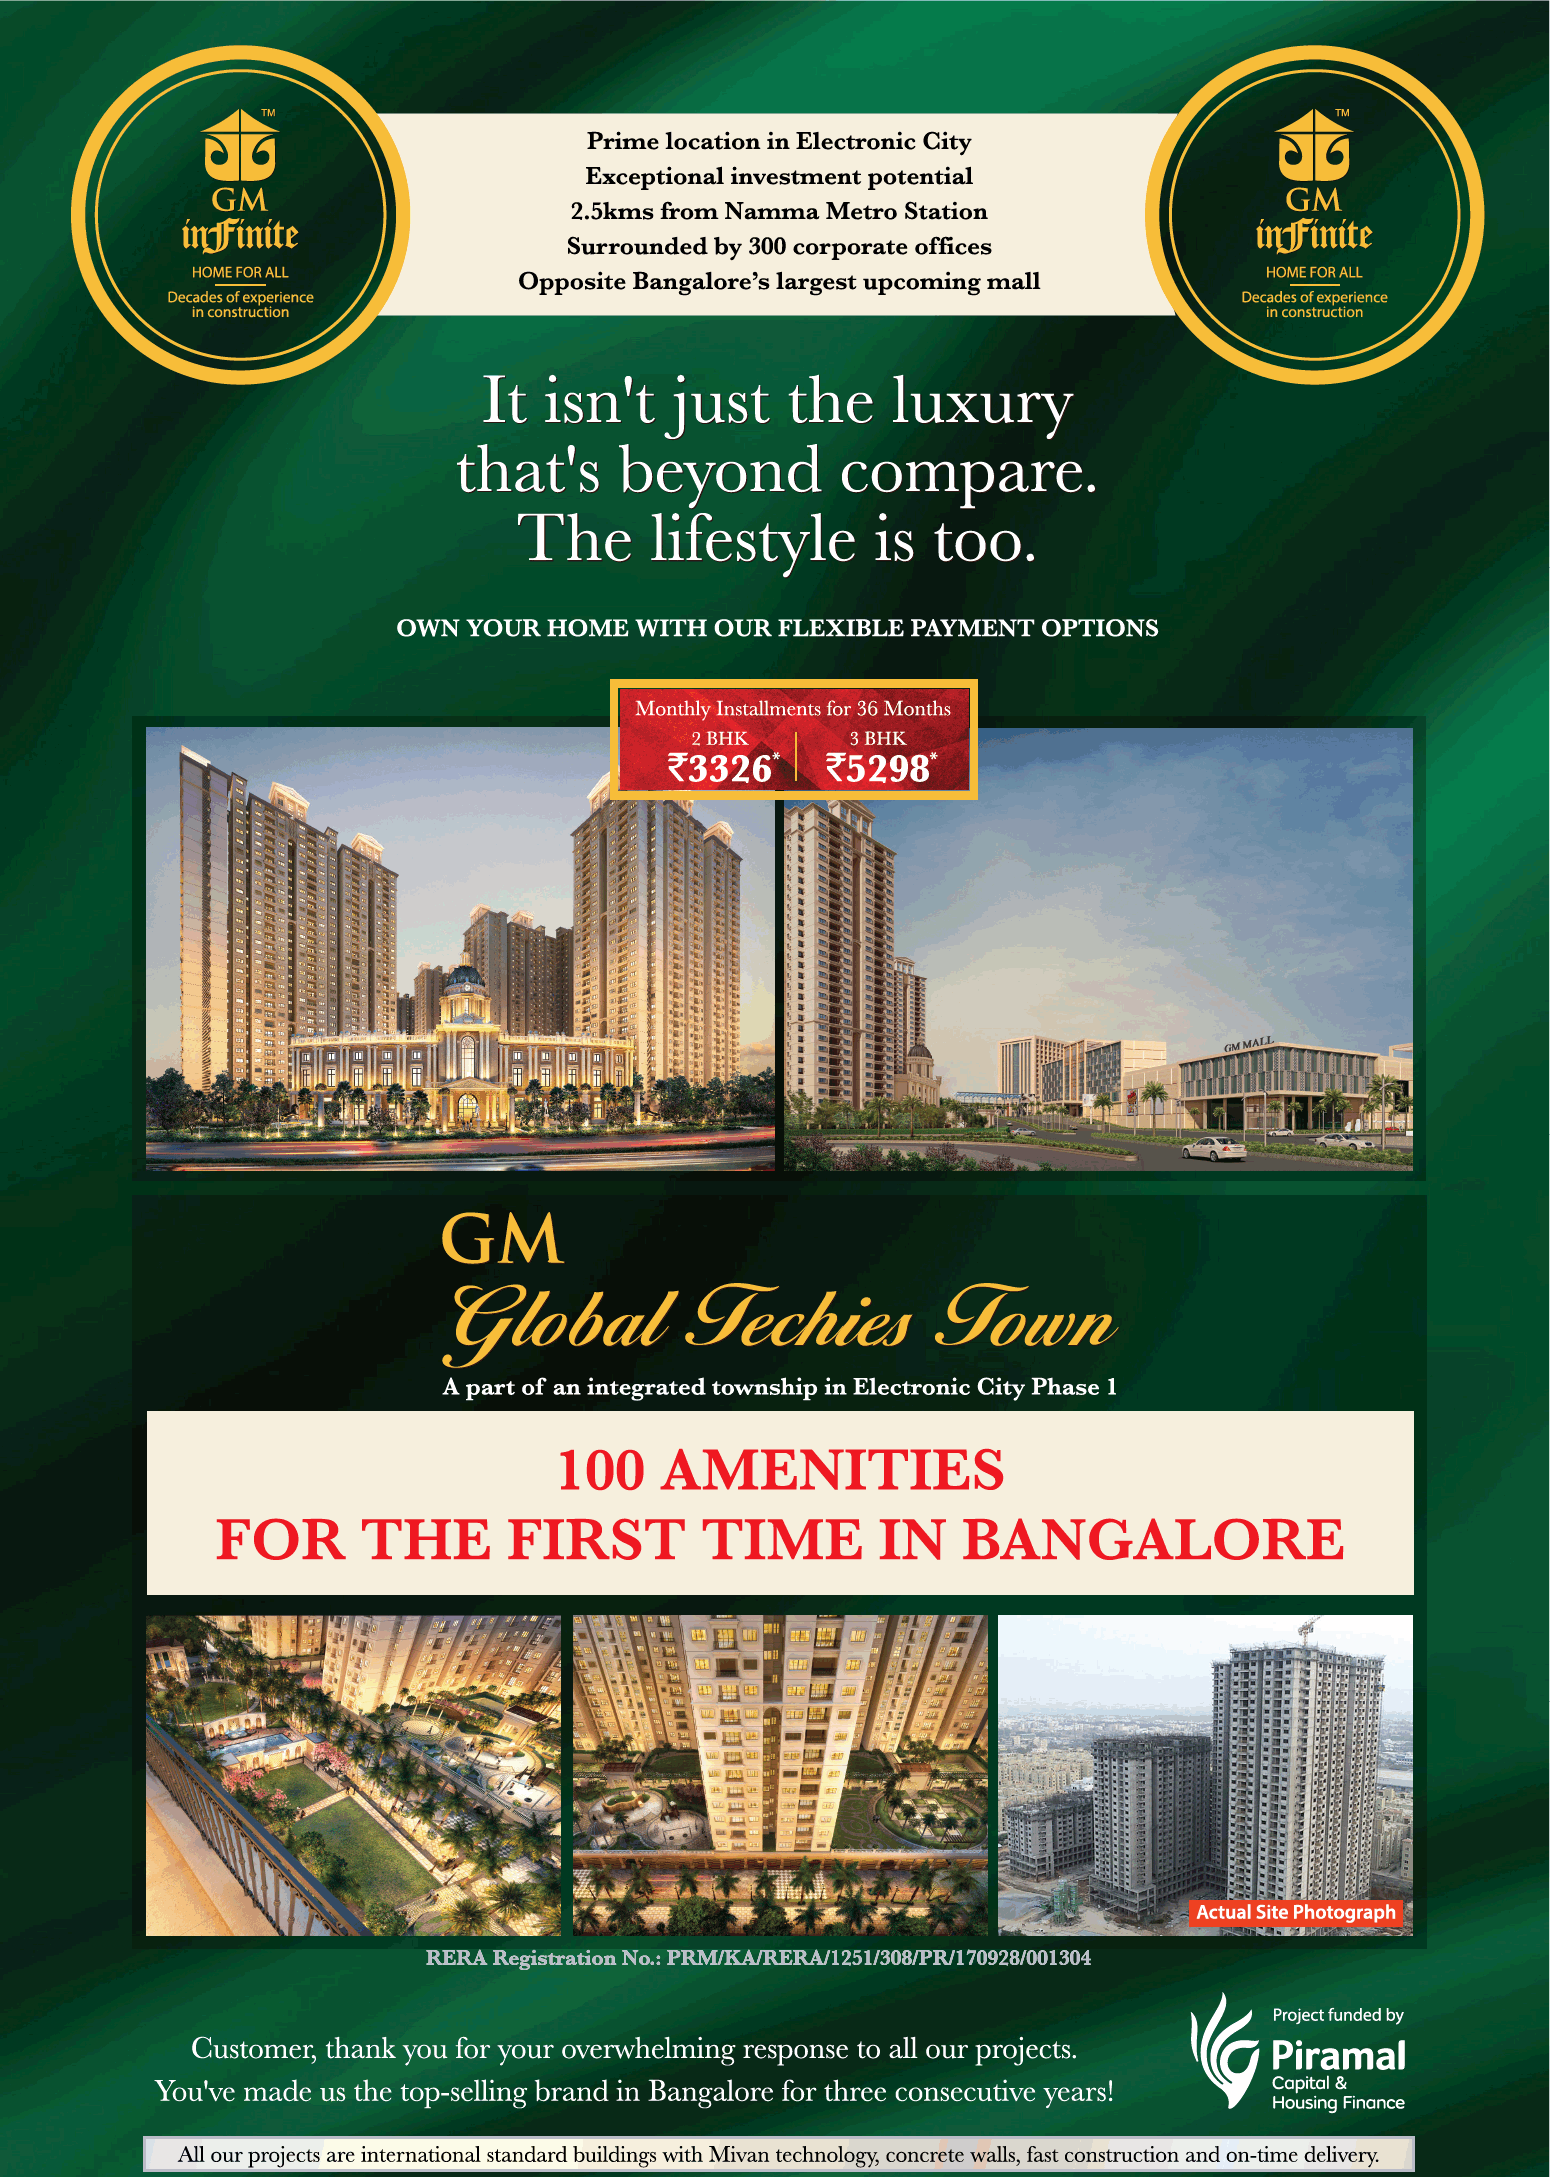 Avail 2 & 3 bhk at GM Global Techies Town in Bangalore